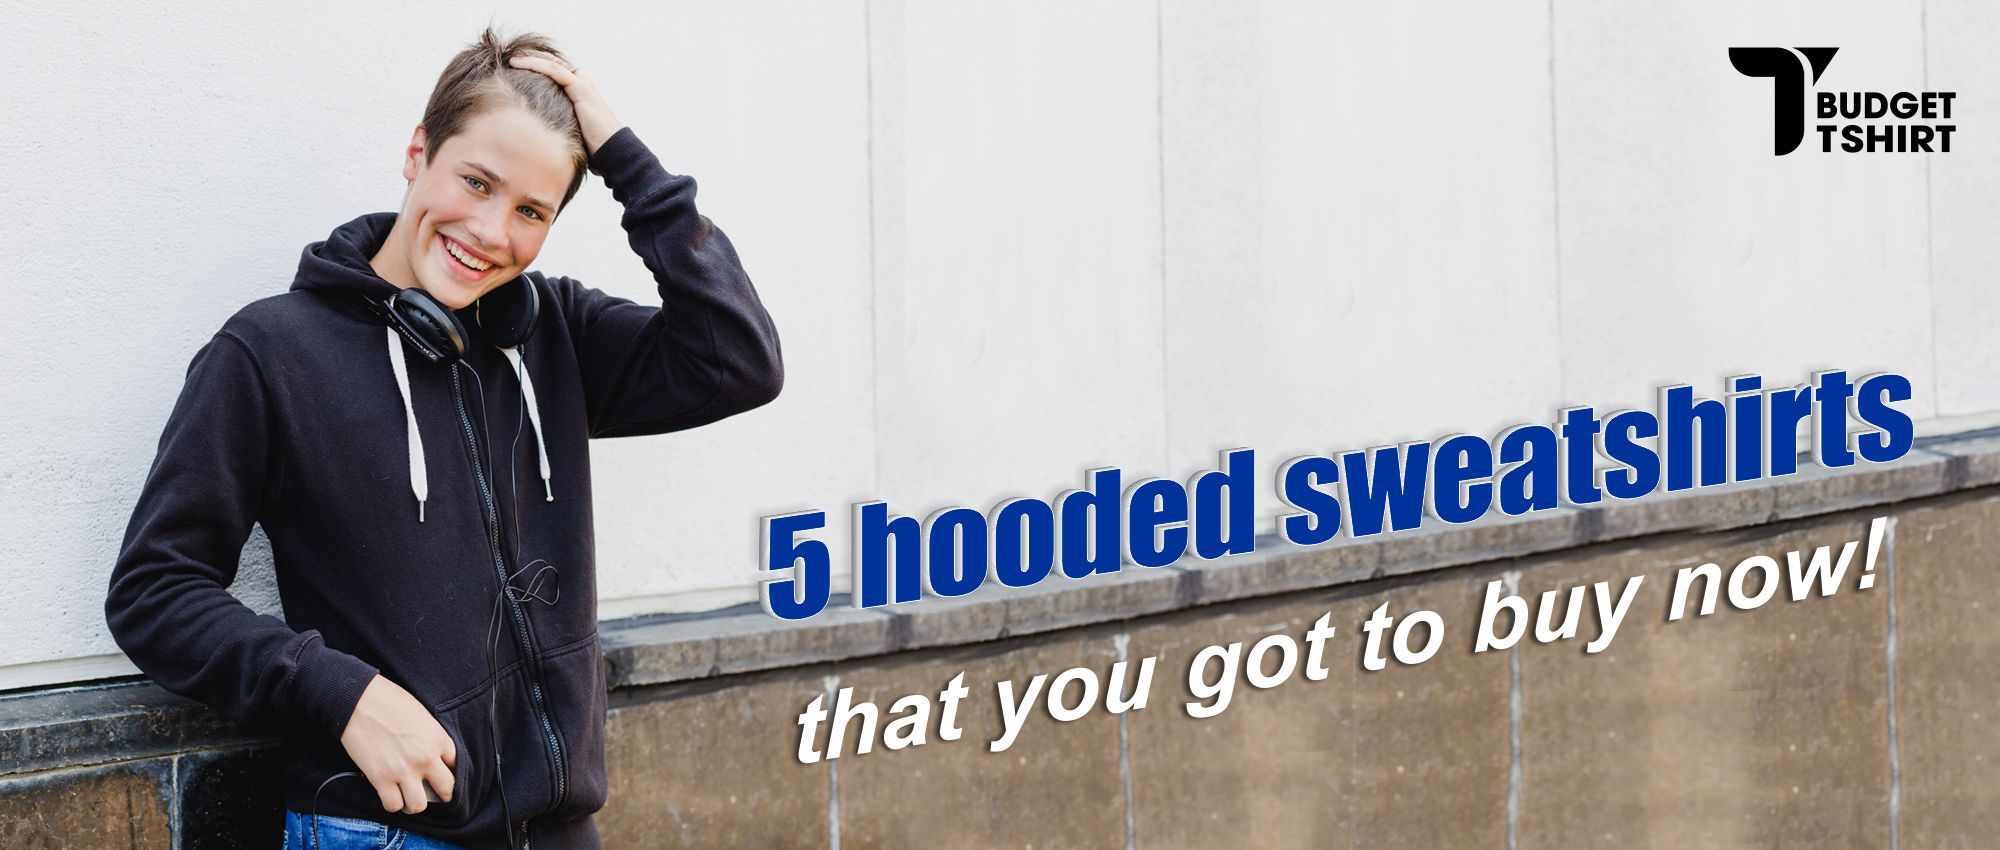 5 hooded sweatshirts that you got to buy now!